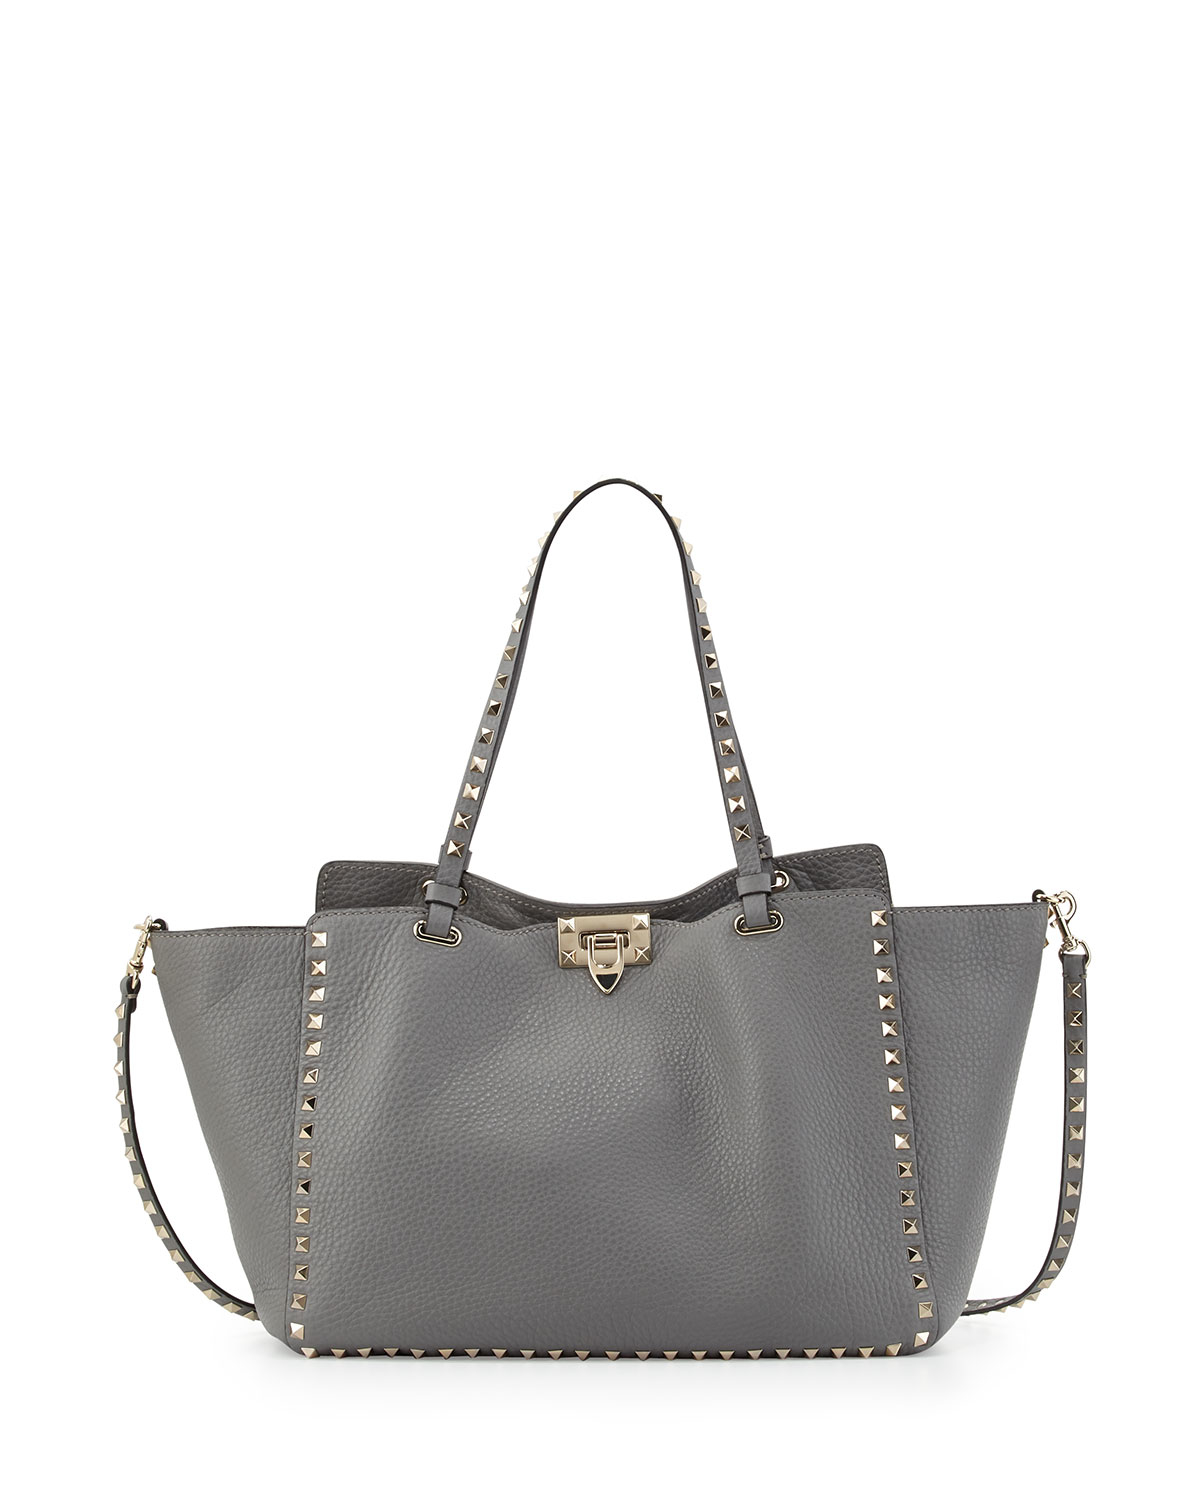 Lyst - Valentino Rockstud Grained Leather Medium Tote Bag in Gray